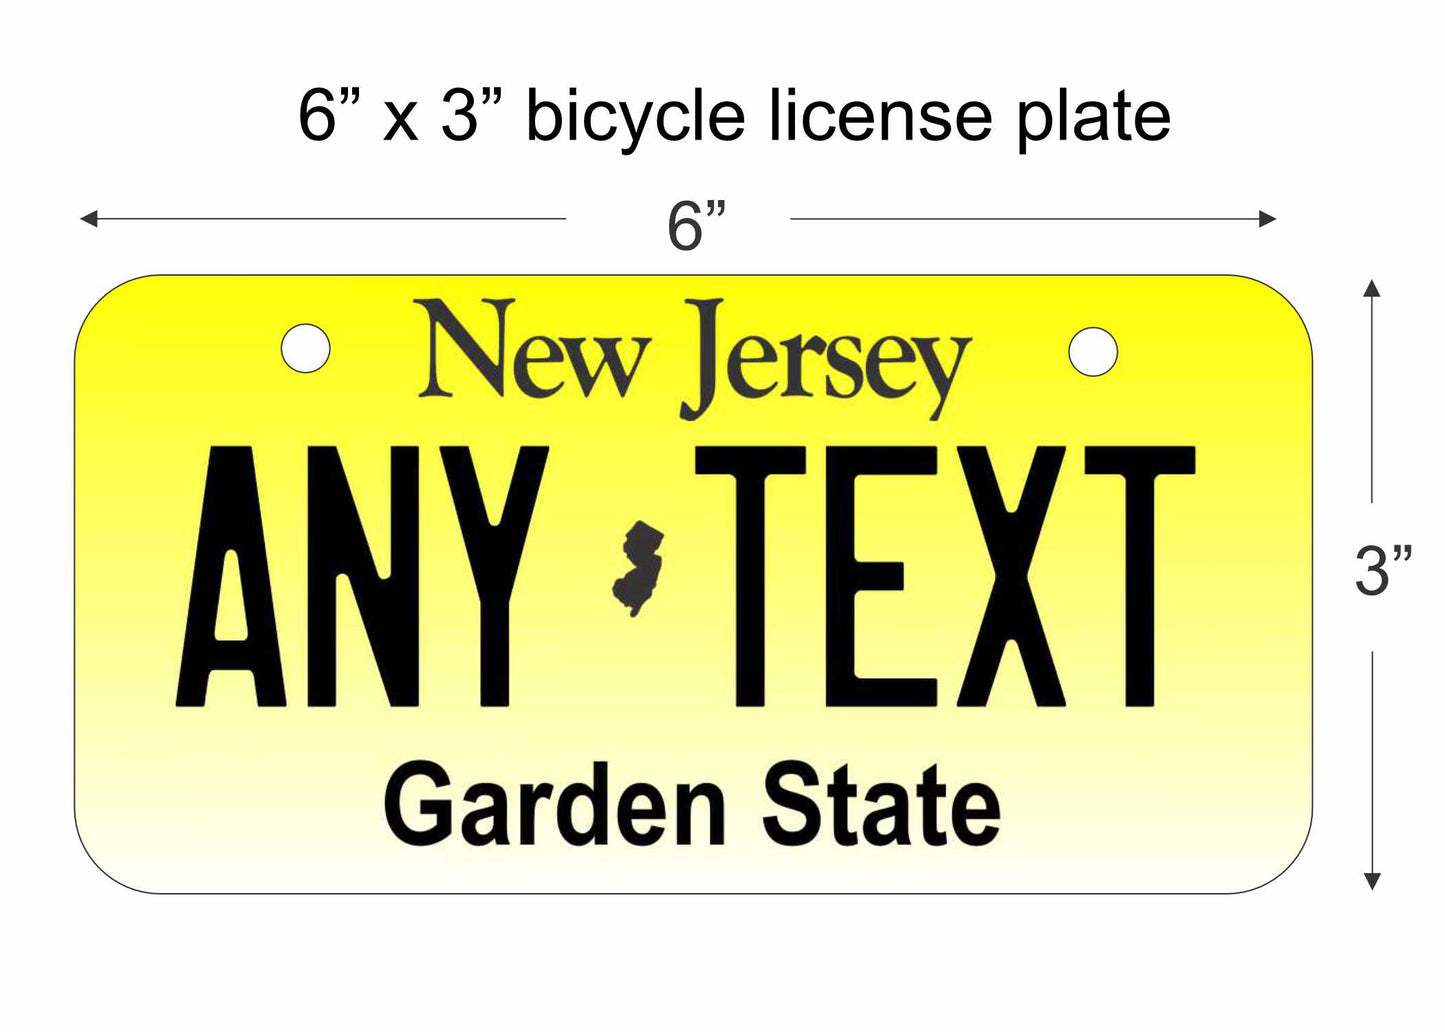 New Jersey state replica bicycle license plate personalized with any text custom made decorative aluminum sign